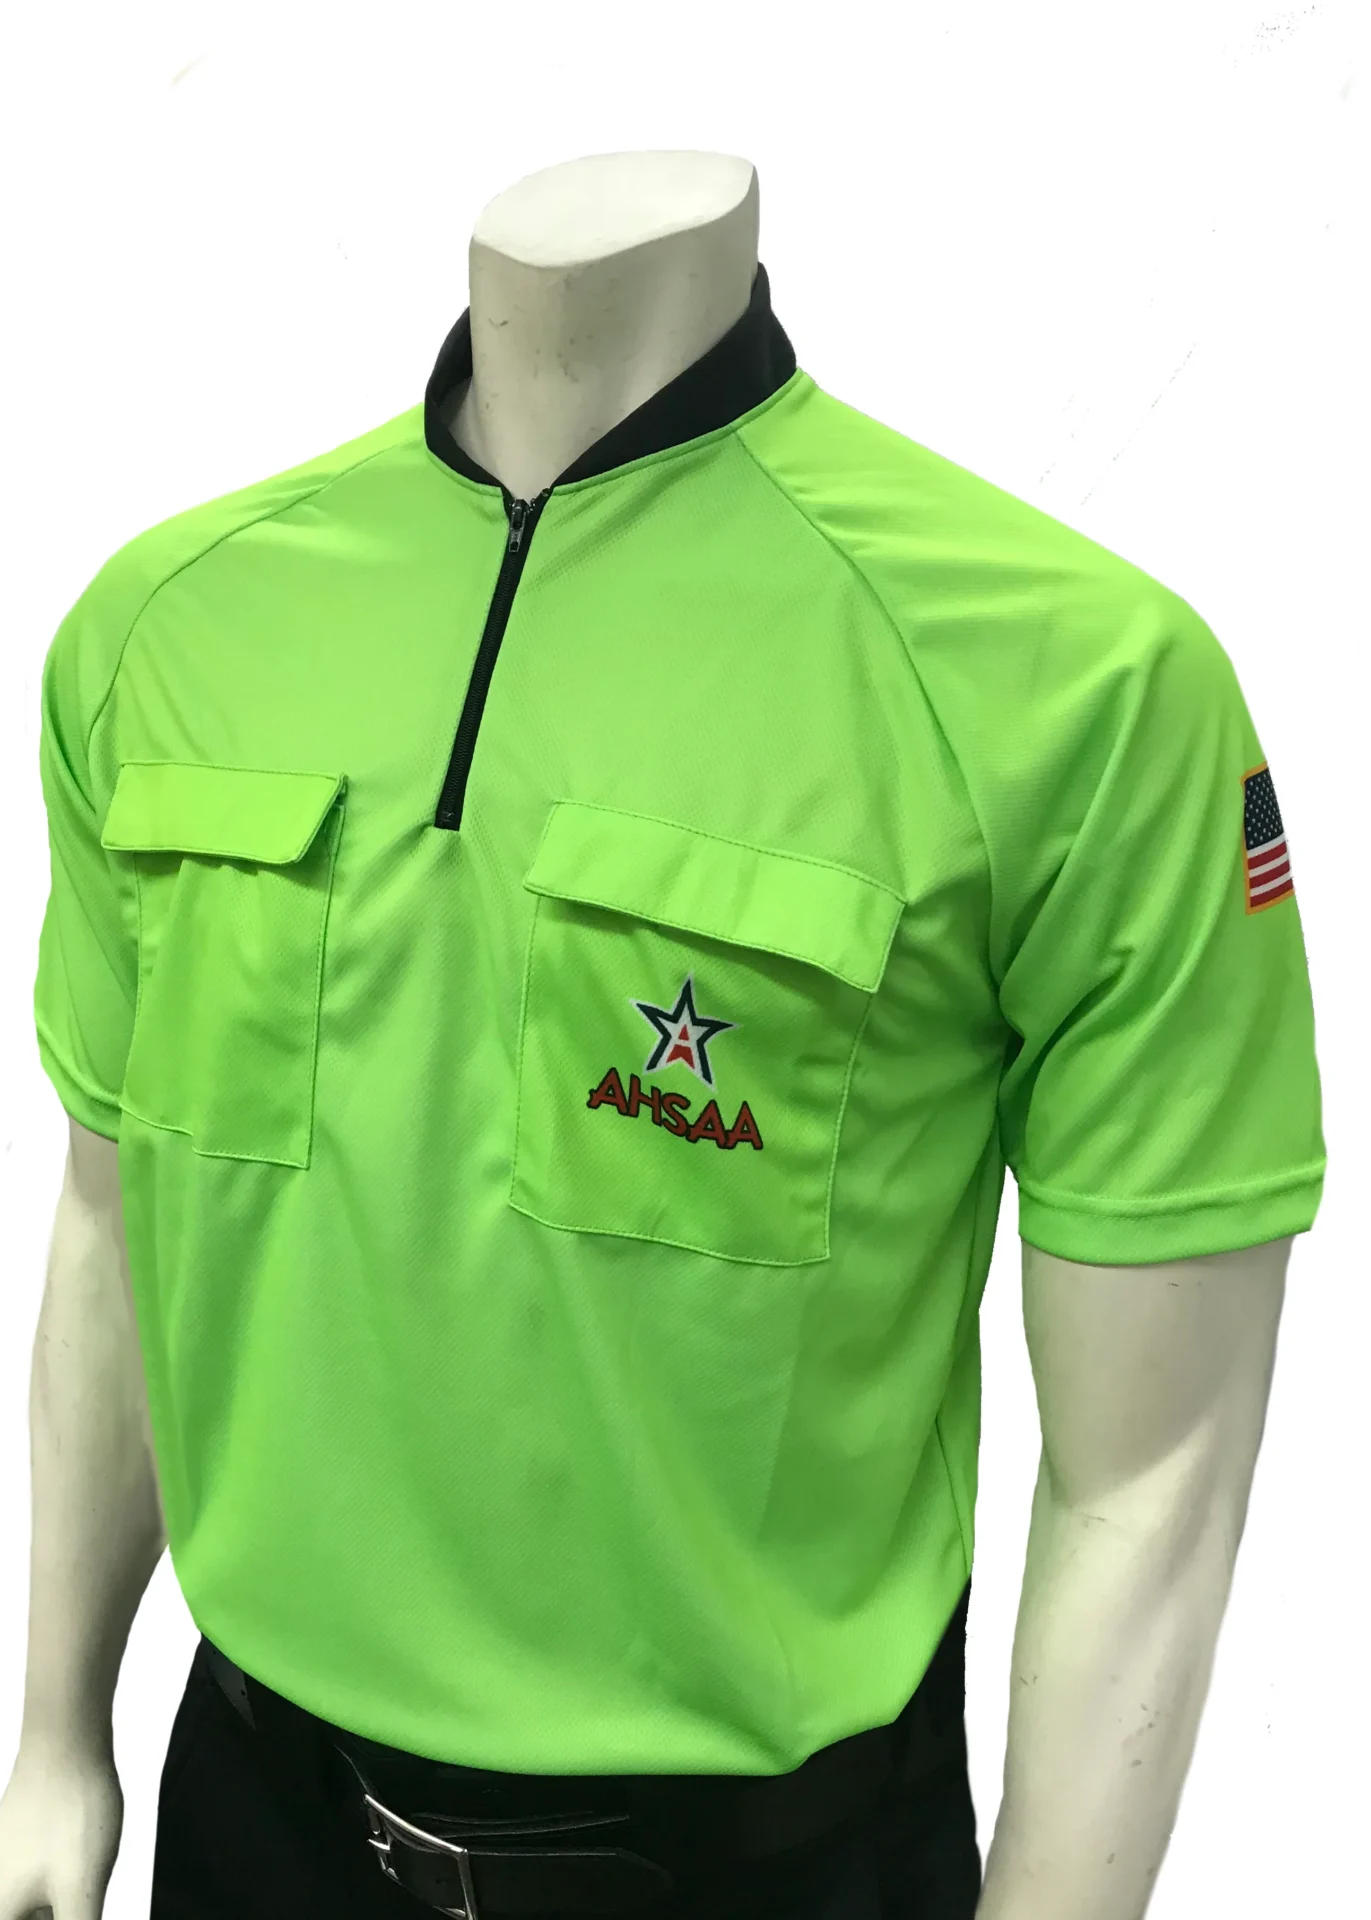 A referee shirt with the name of amaa on it.